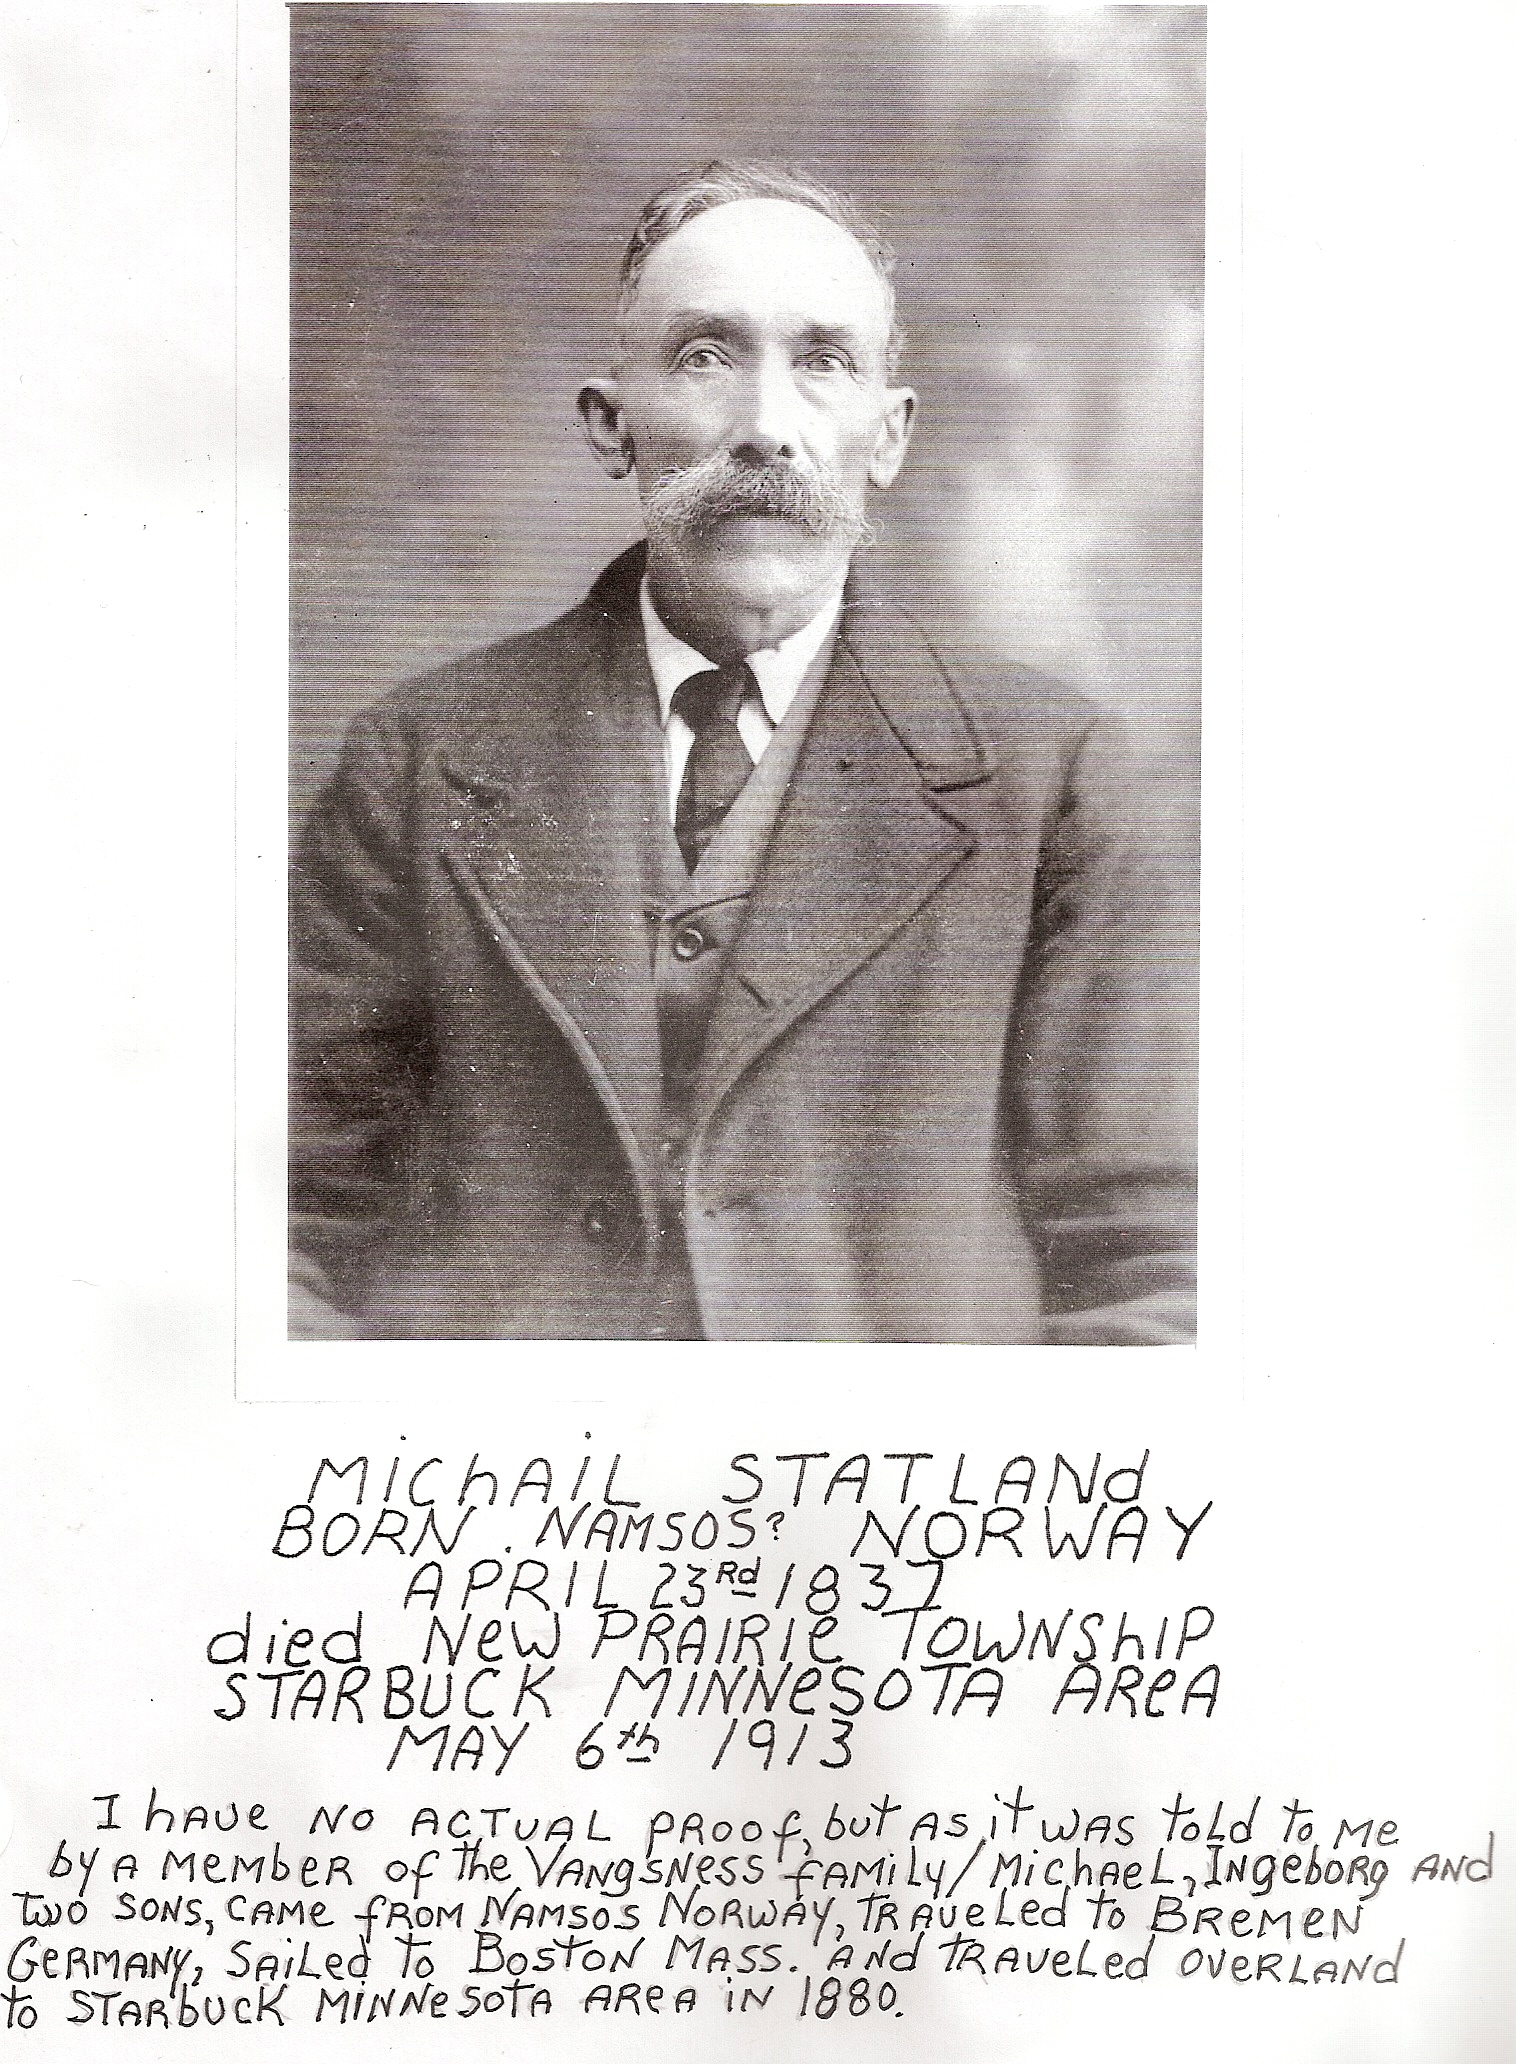 Michail Statland (my g-g-grandfather from Norway)- with info